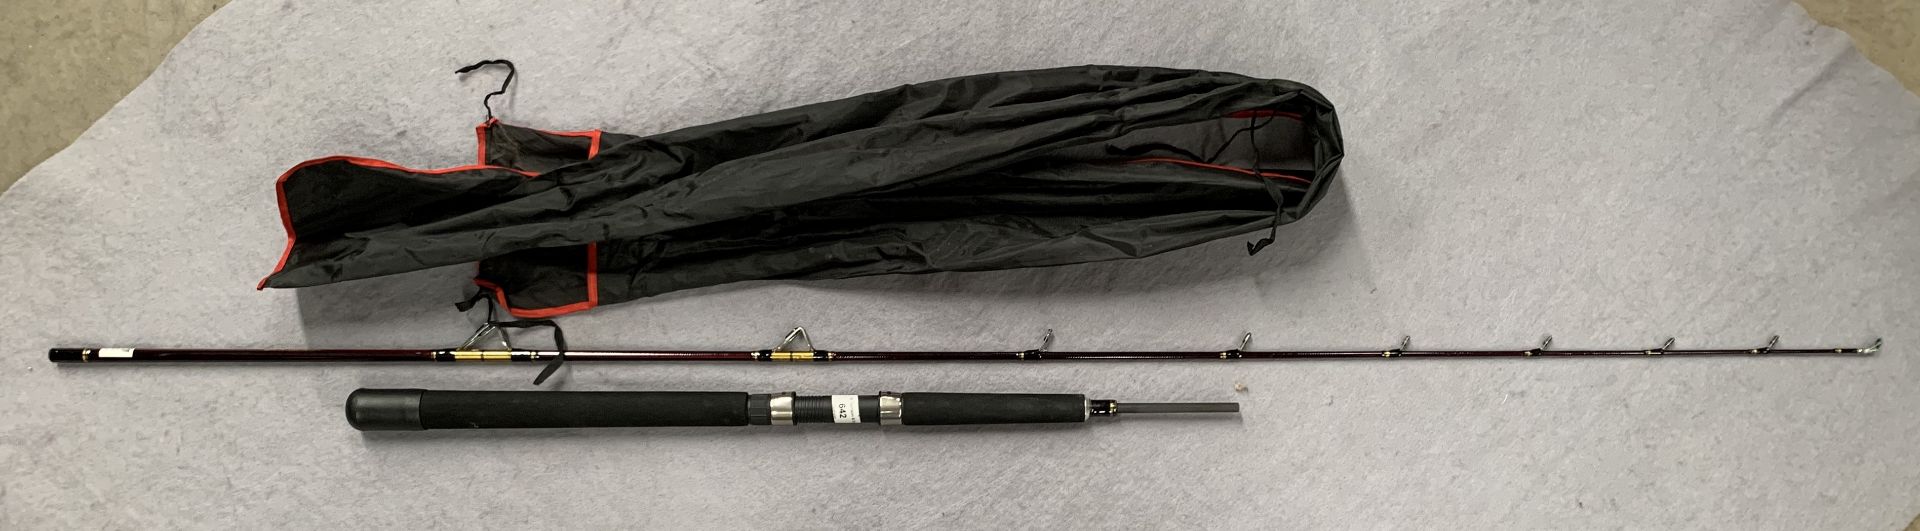 A Masterline Tideline TL2750 7' two-piece boat rod 50lb class complete with bag